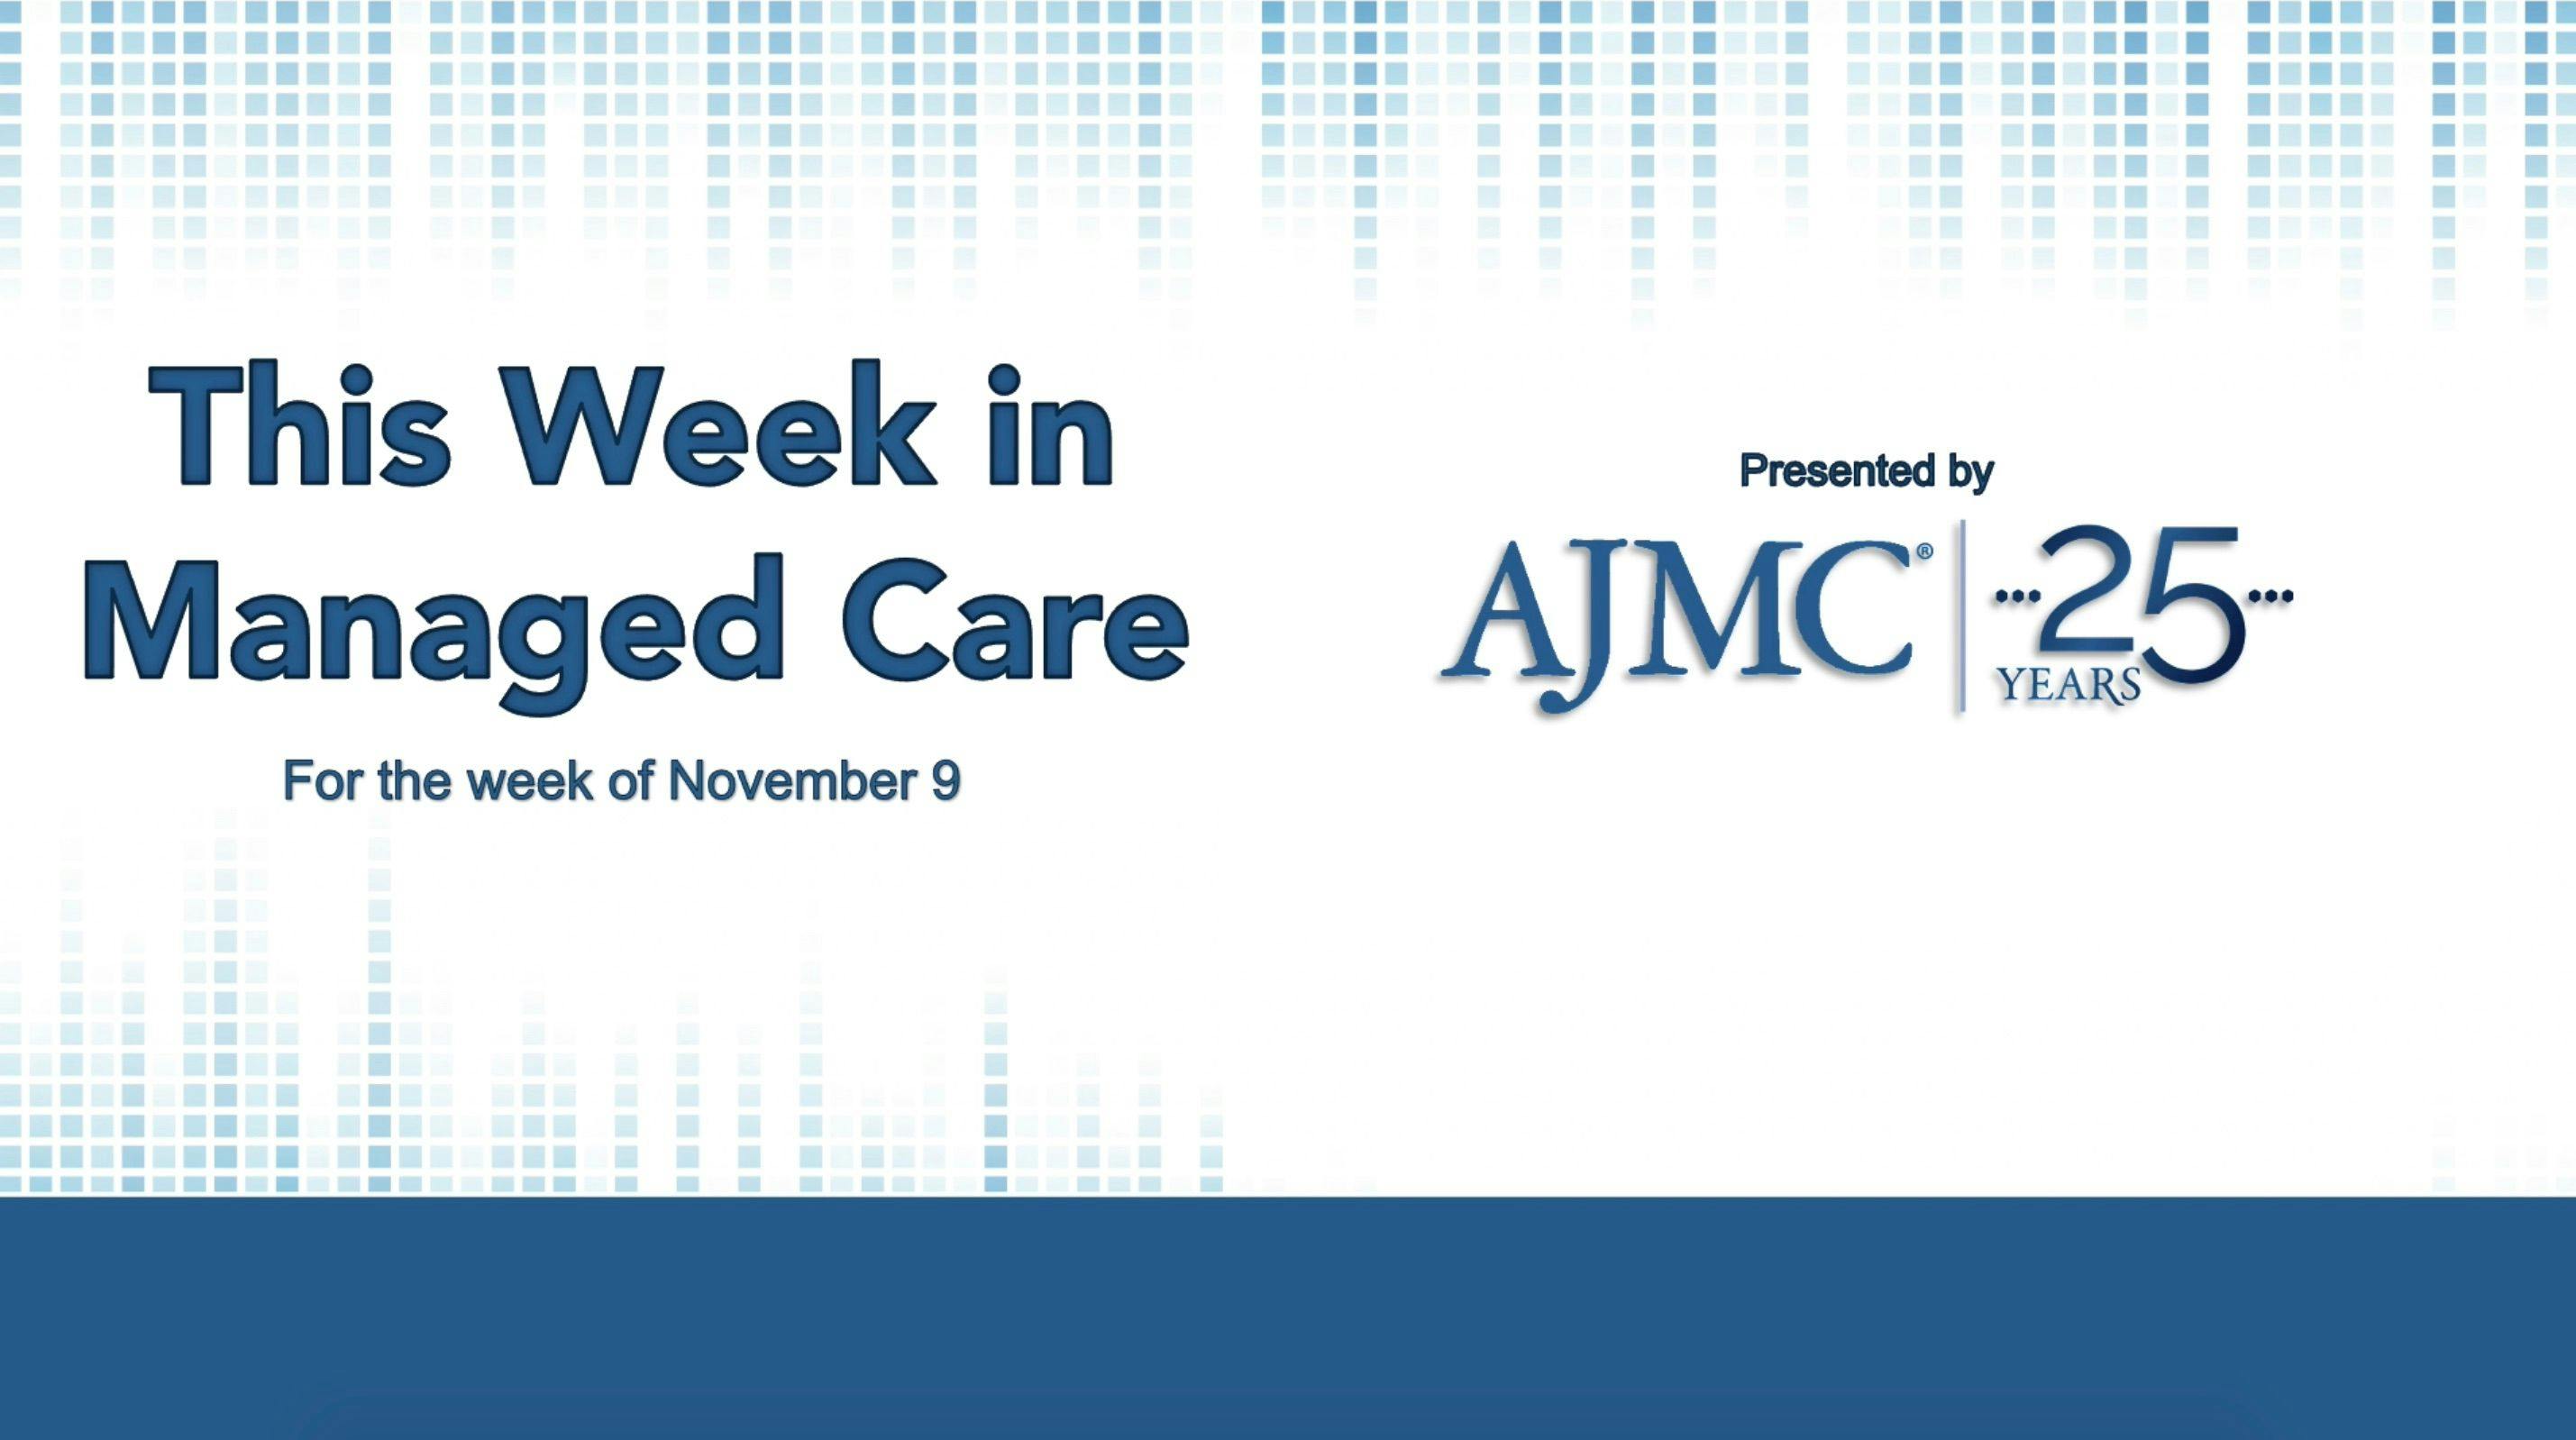 This Week in Managed Care: November 13, 2020